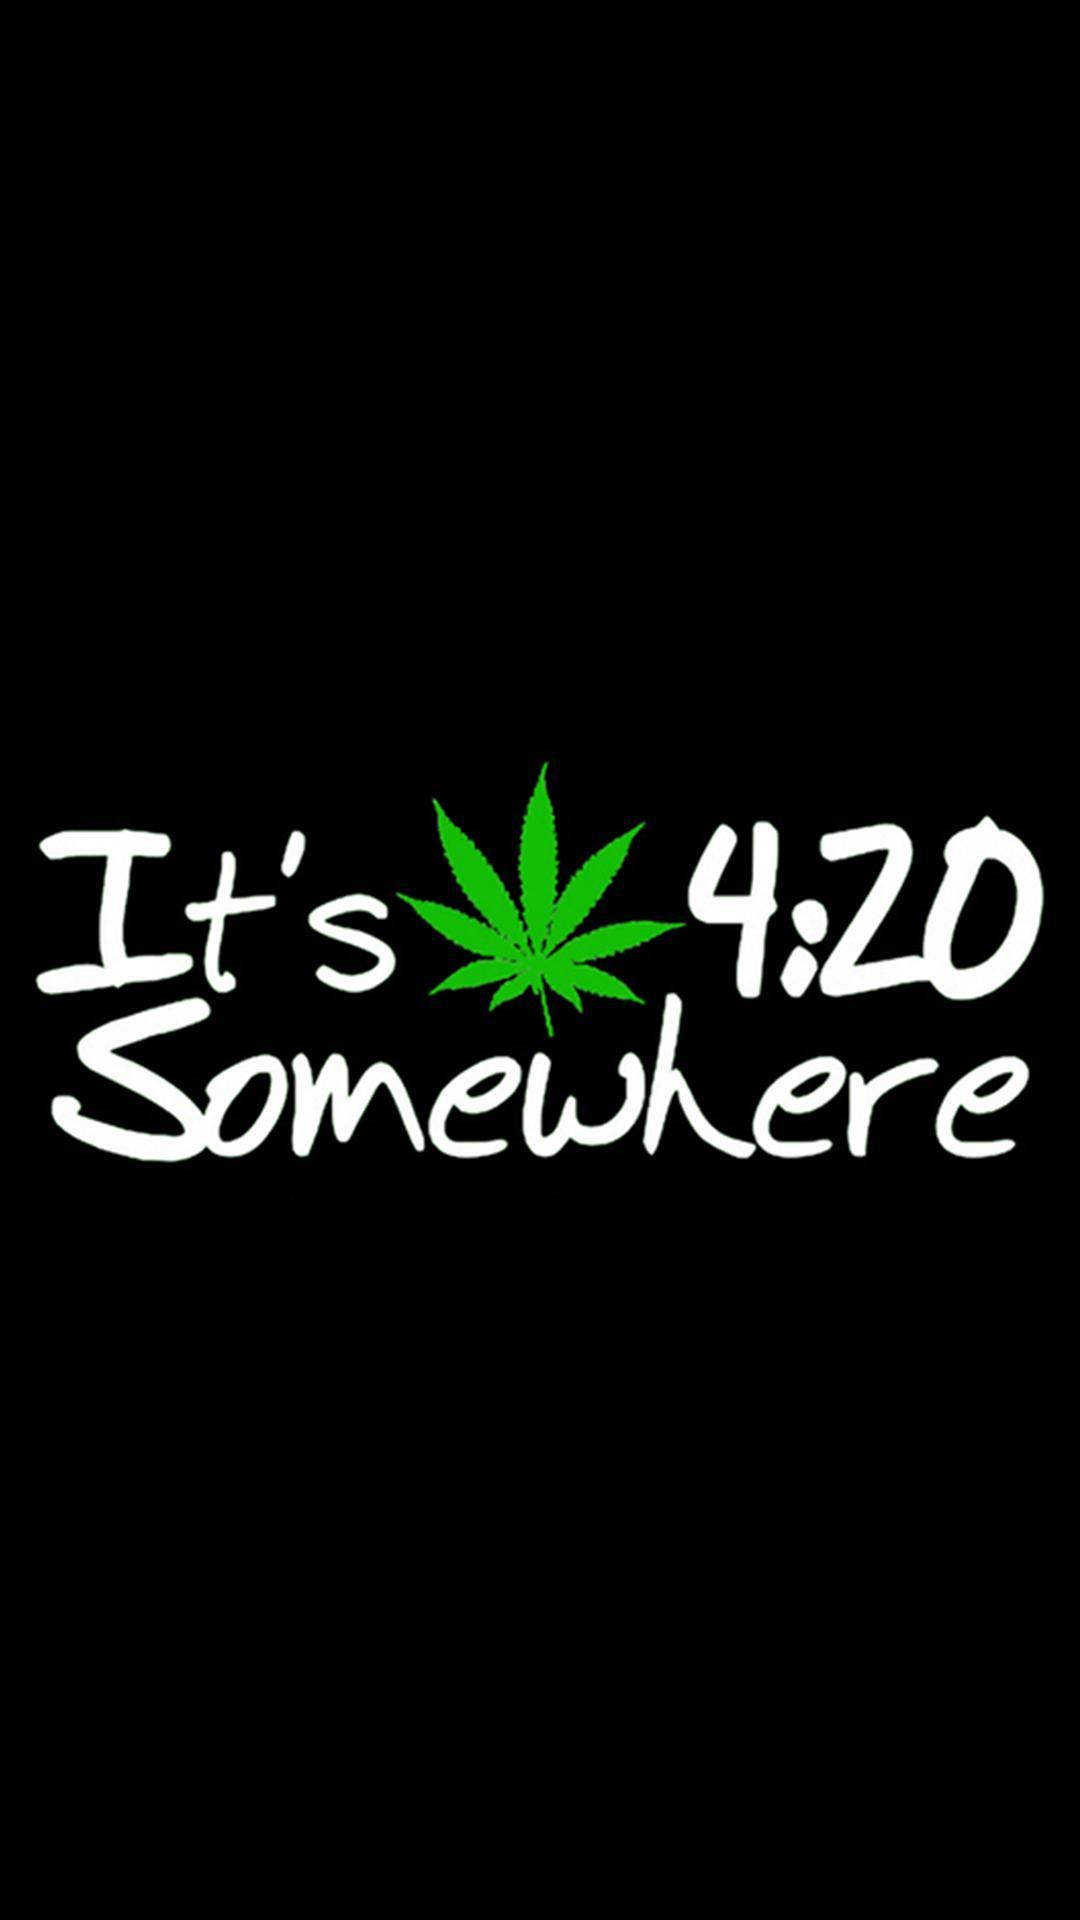 Weed For Android Wallpapers